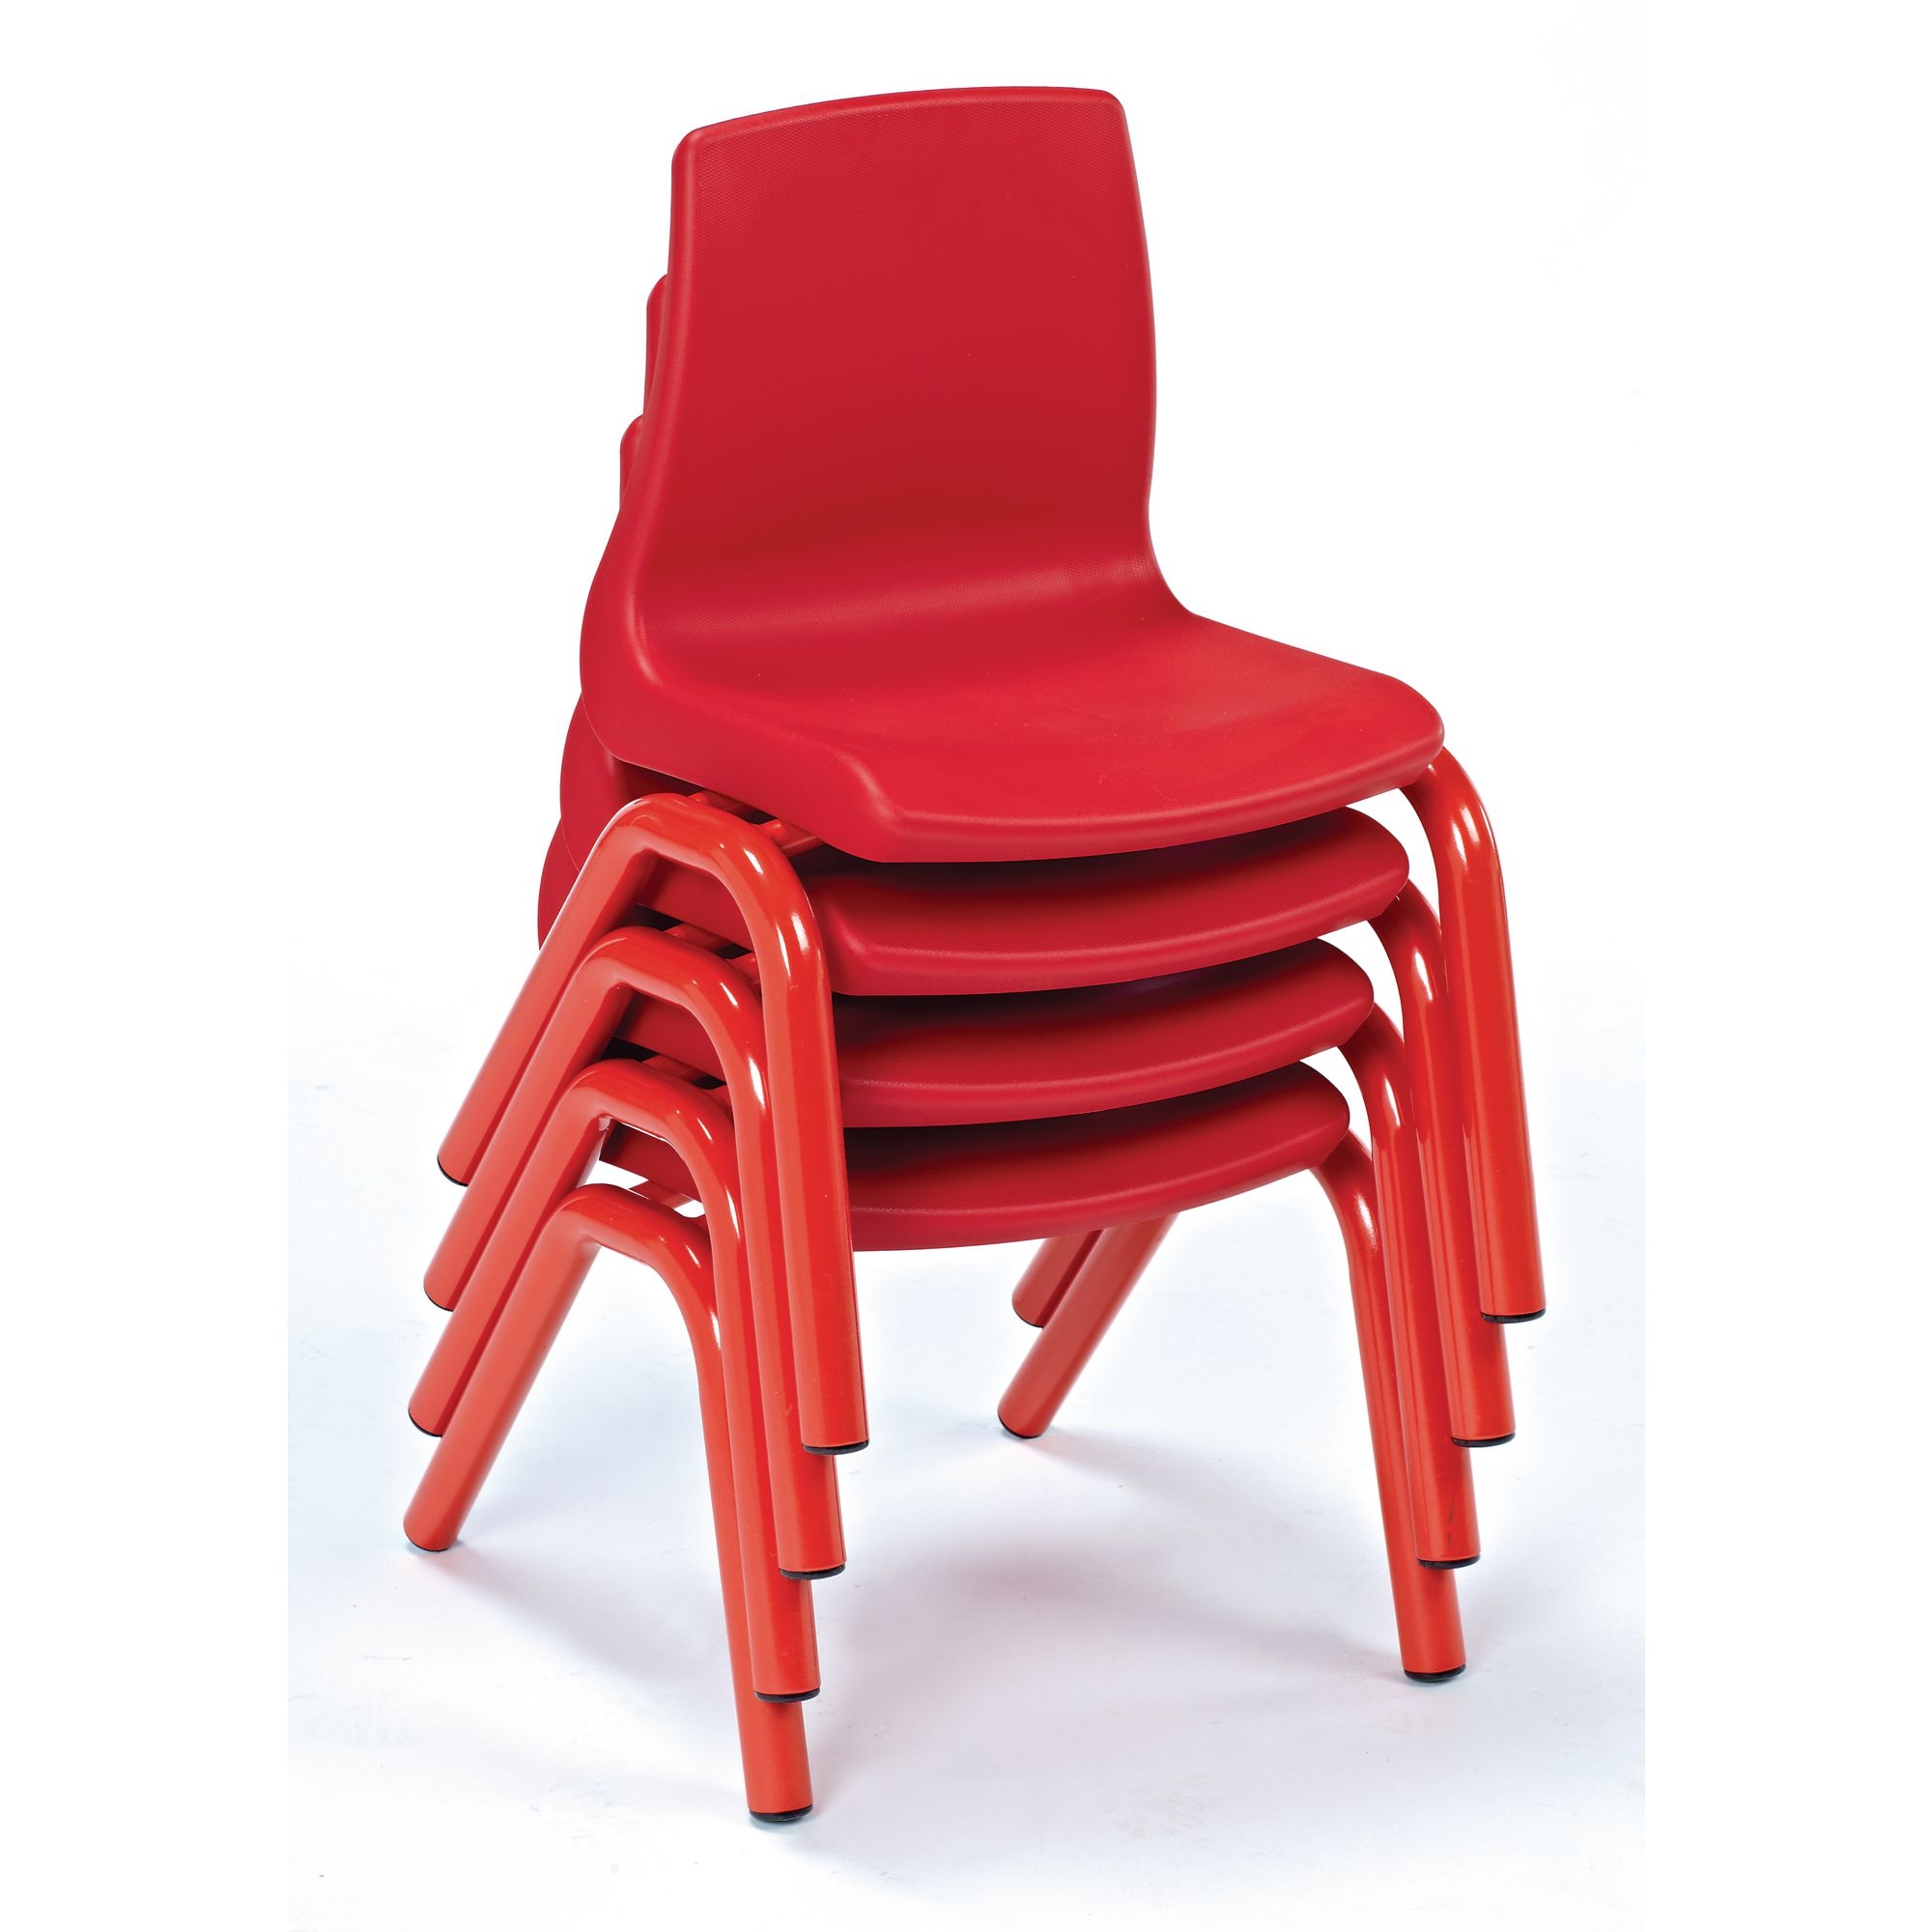 Harlequin Chairs - Pre School - Seat height: 200mm - Yellow